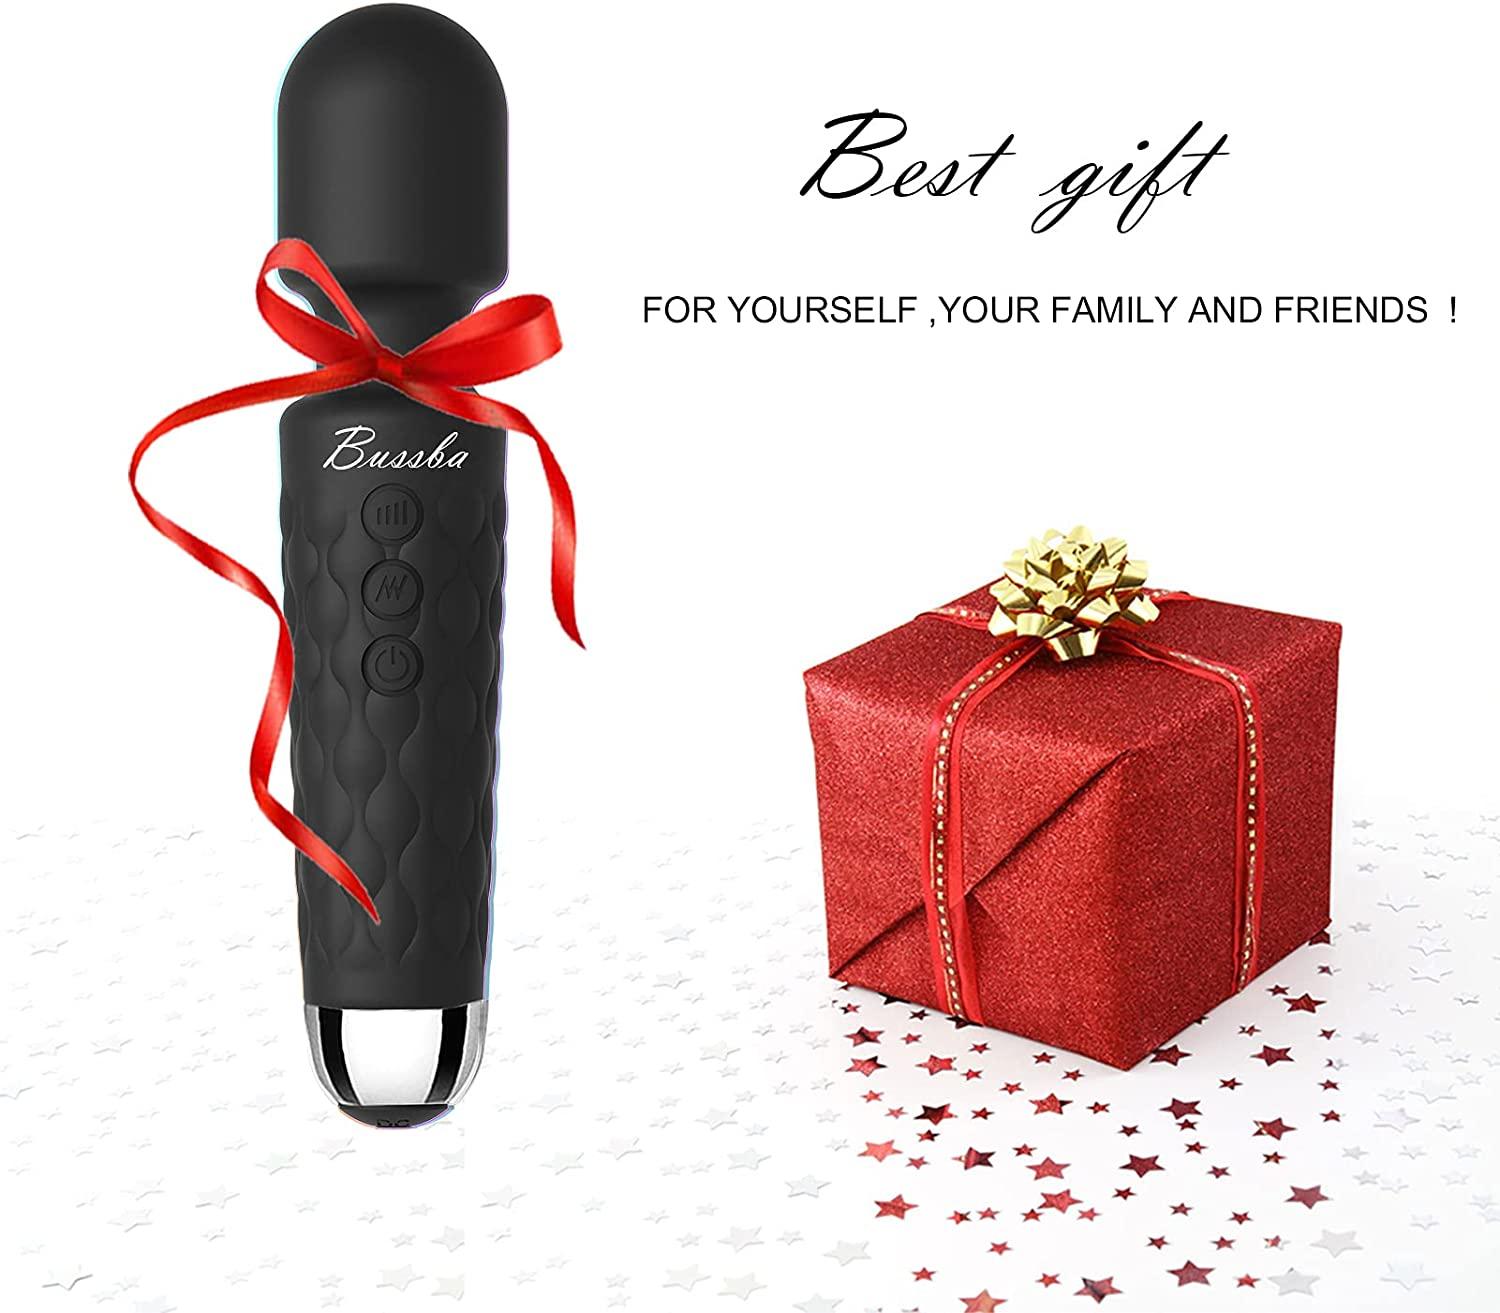 5 Gift Ideas for Your Friends and Family | Vaya